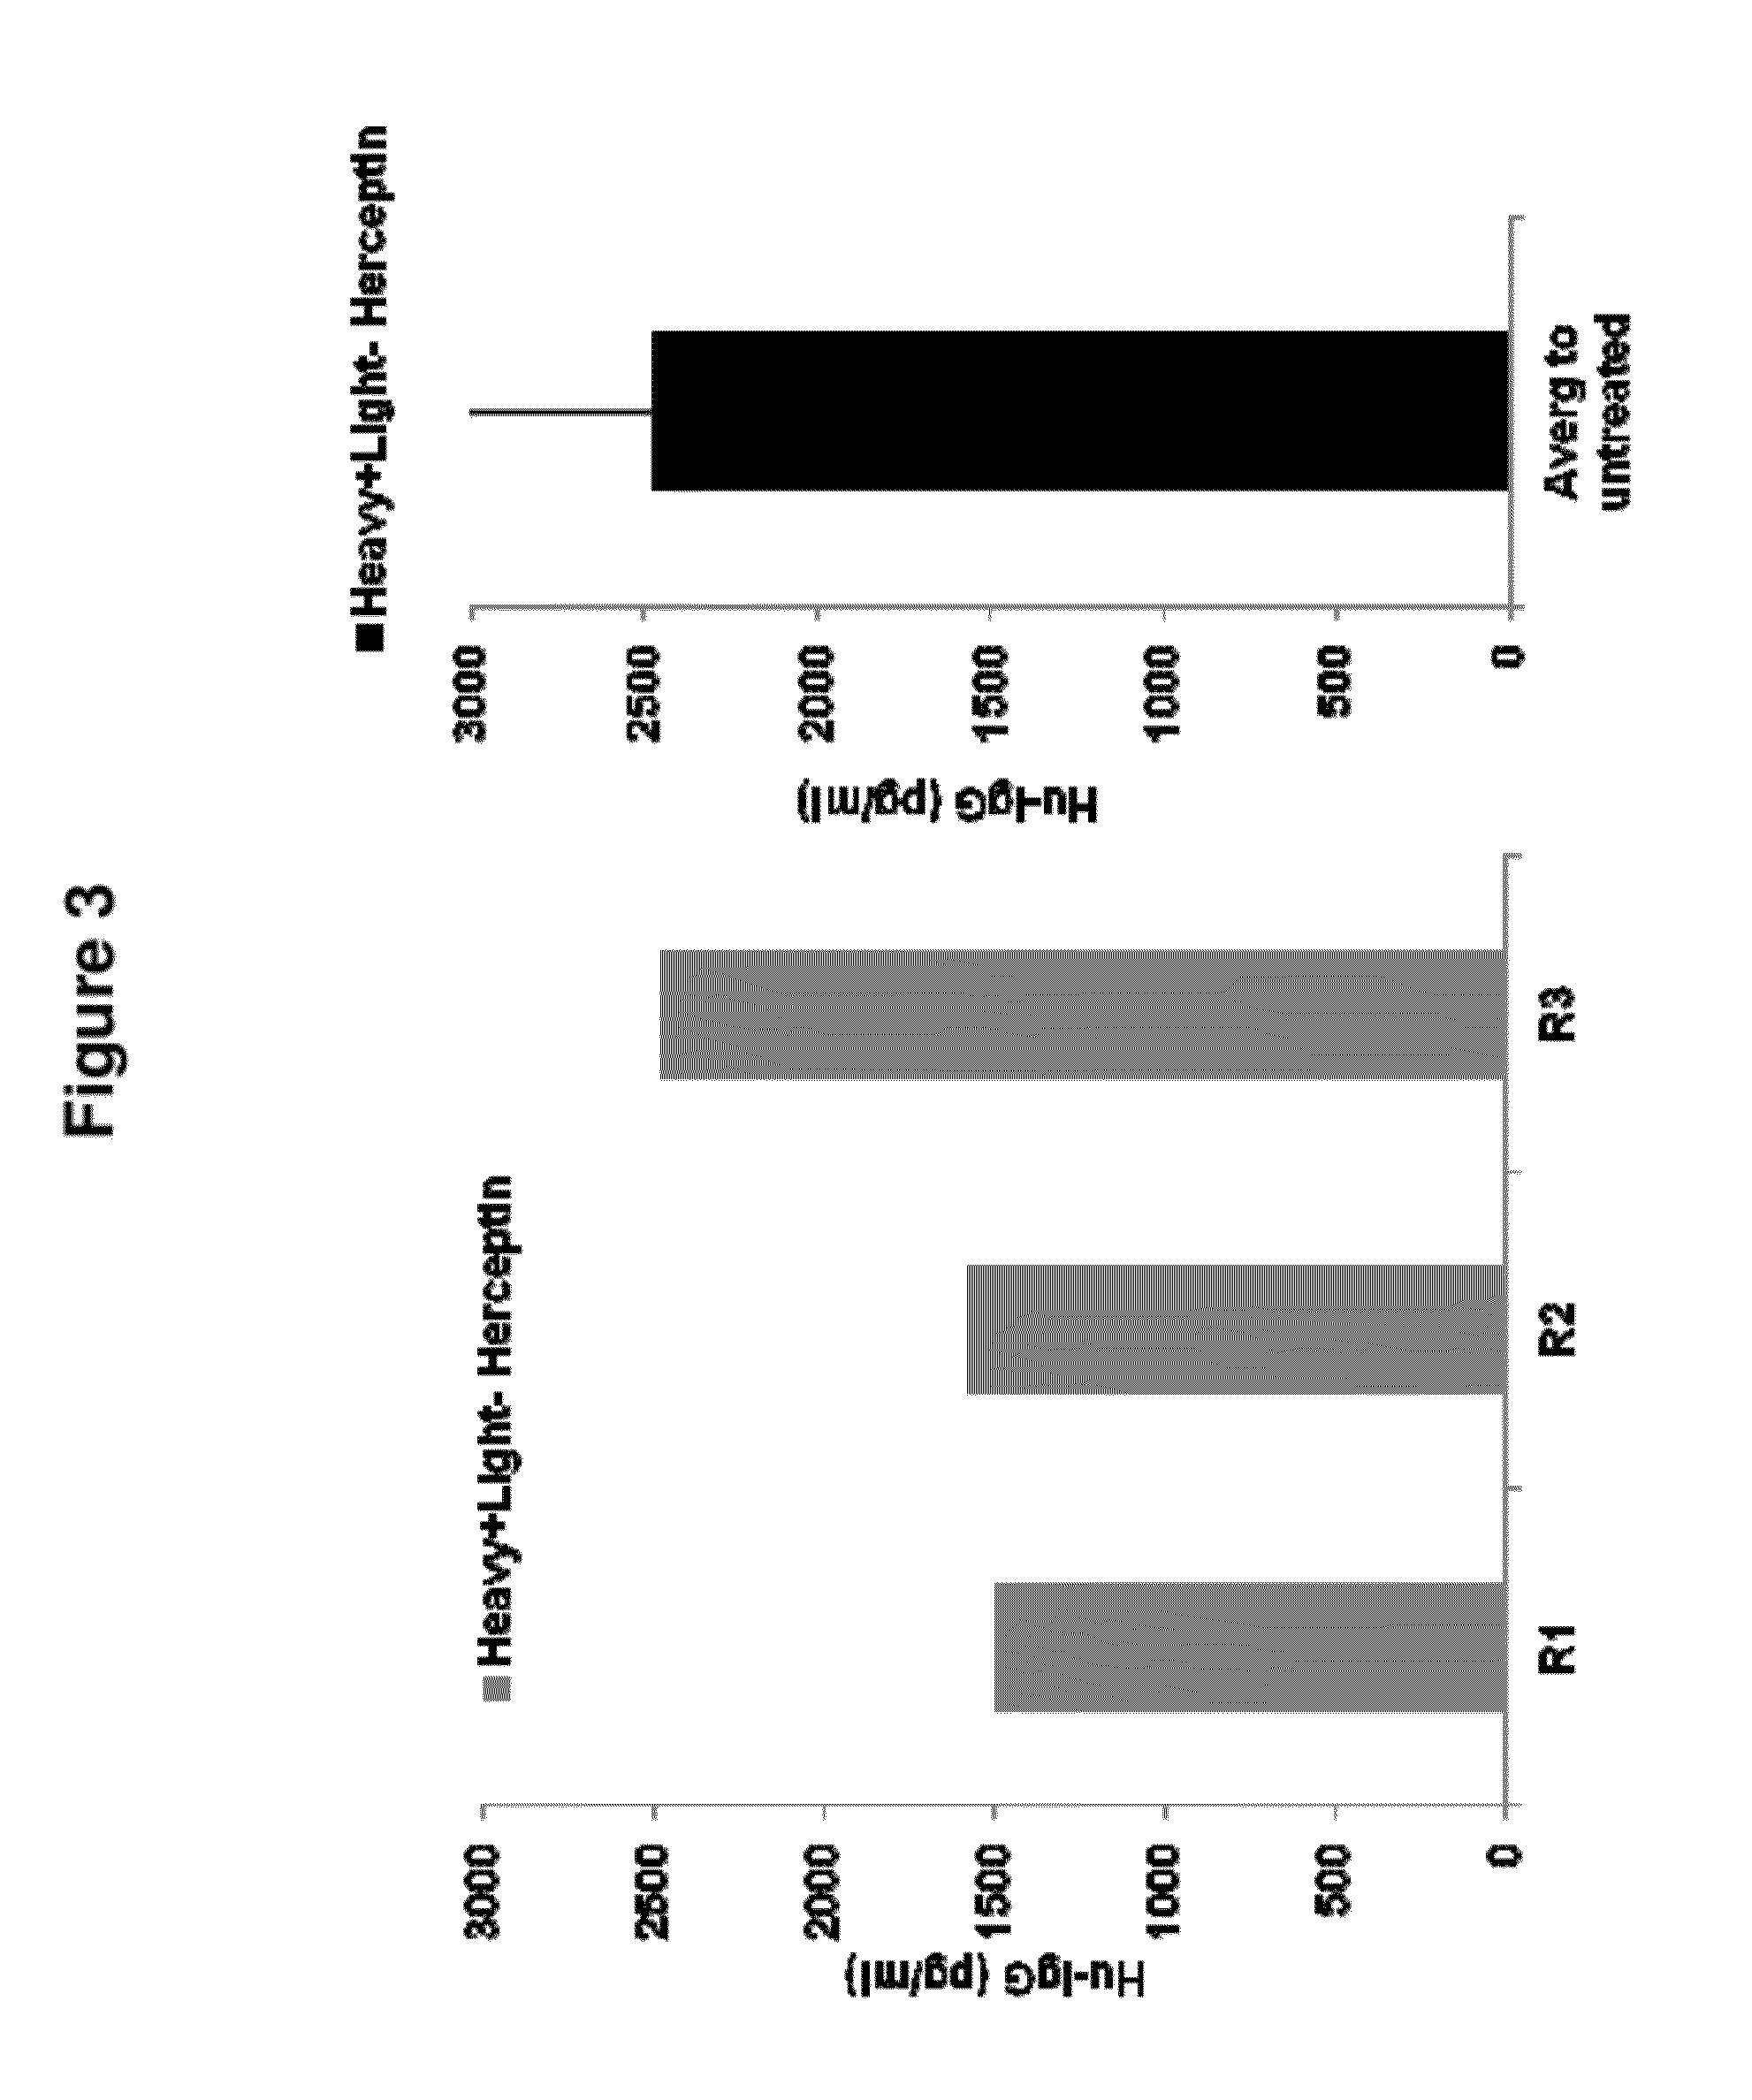 Engineered nucleic acids and methods of use thereof